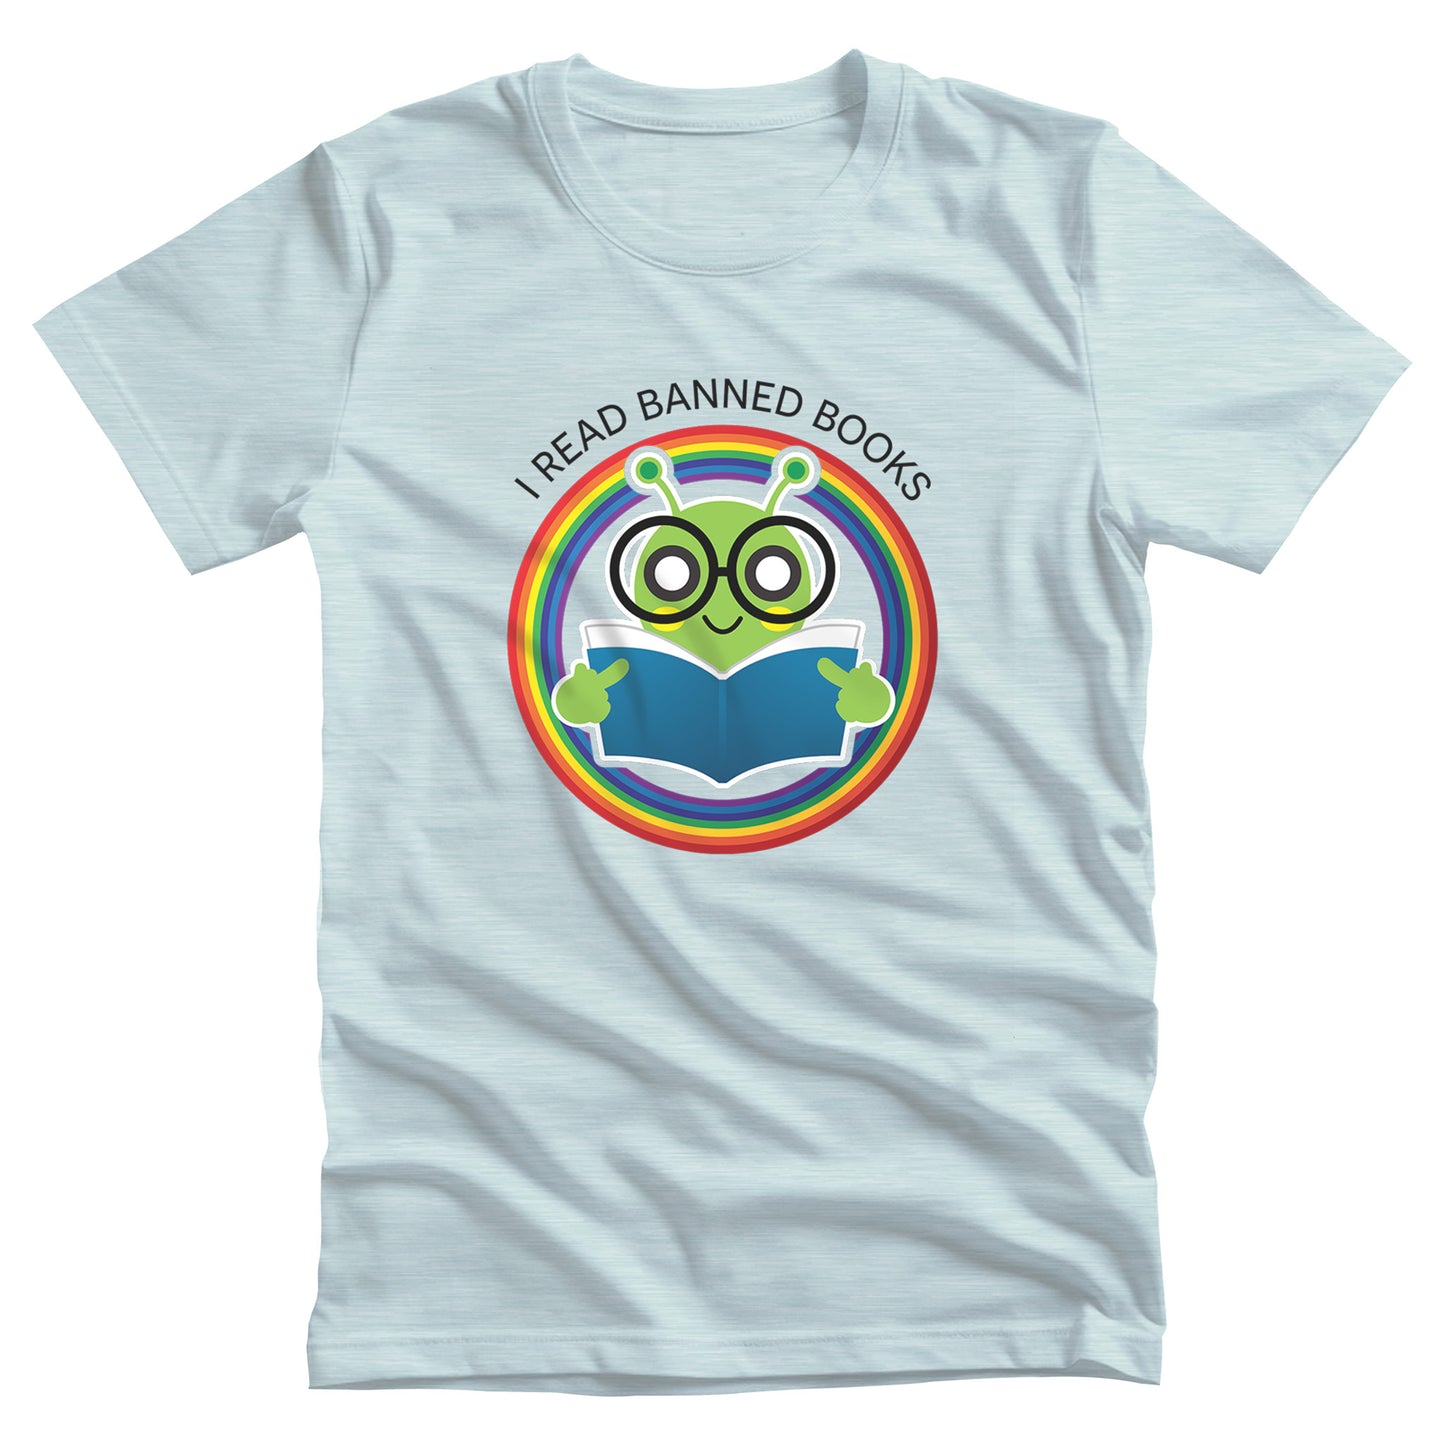 Heather Ice Blue color unisex t-shirt with a graphic of a bookworm with large eyeglasses reading a book. The bookworm is subtly holding up its middle fingers. The image is inside a circle that has rainbow colors. Arched over the top of the graphic are the words “I READ BANNED BOOKS.”